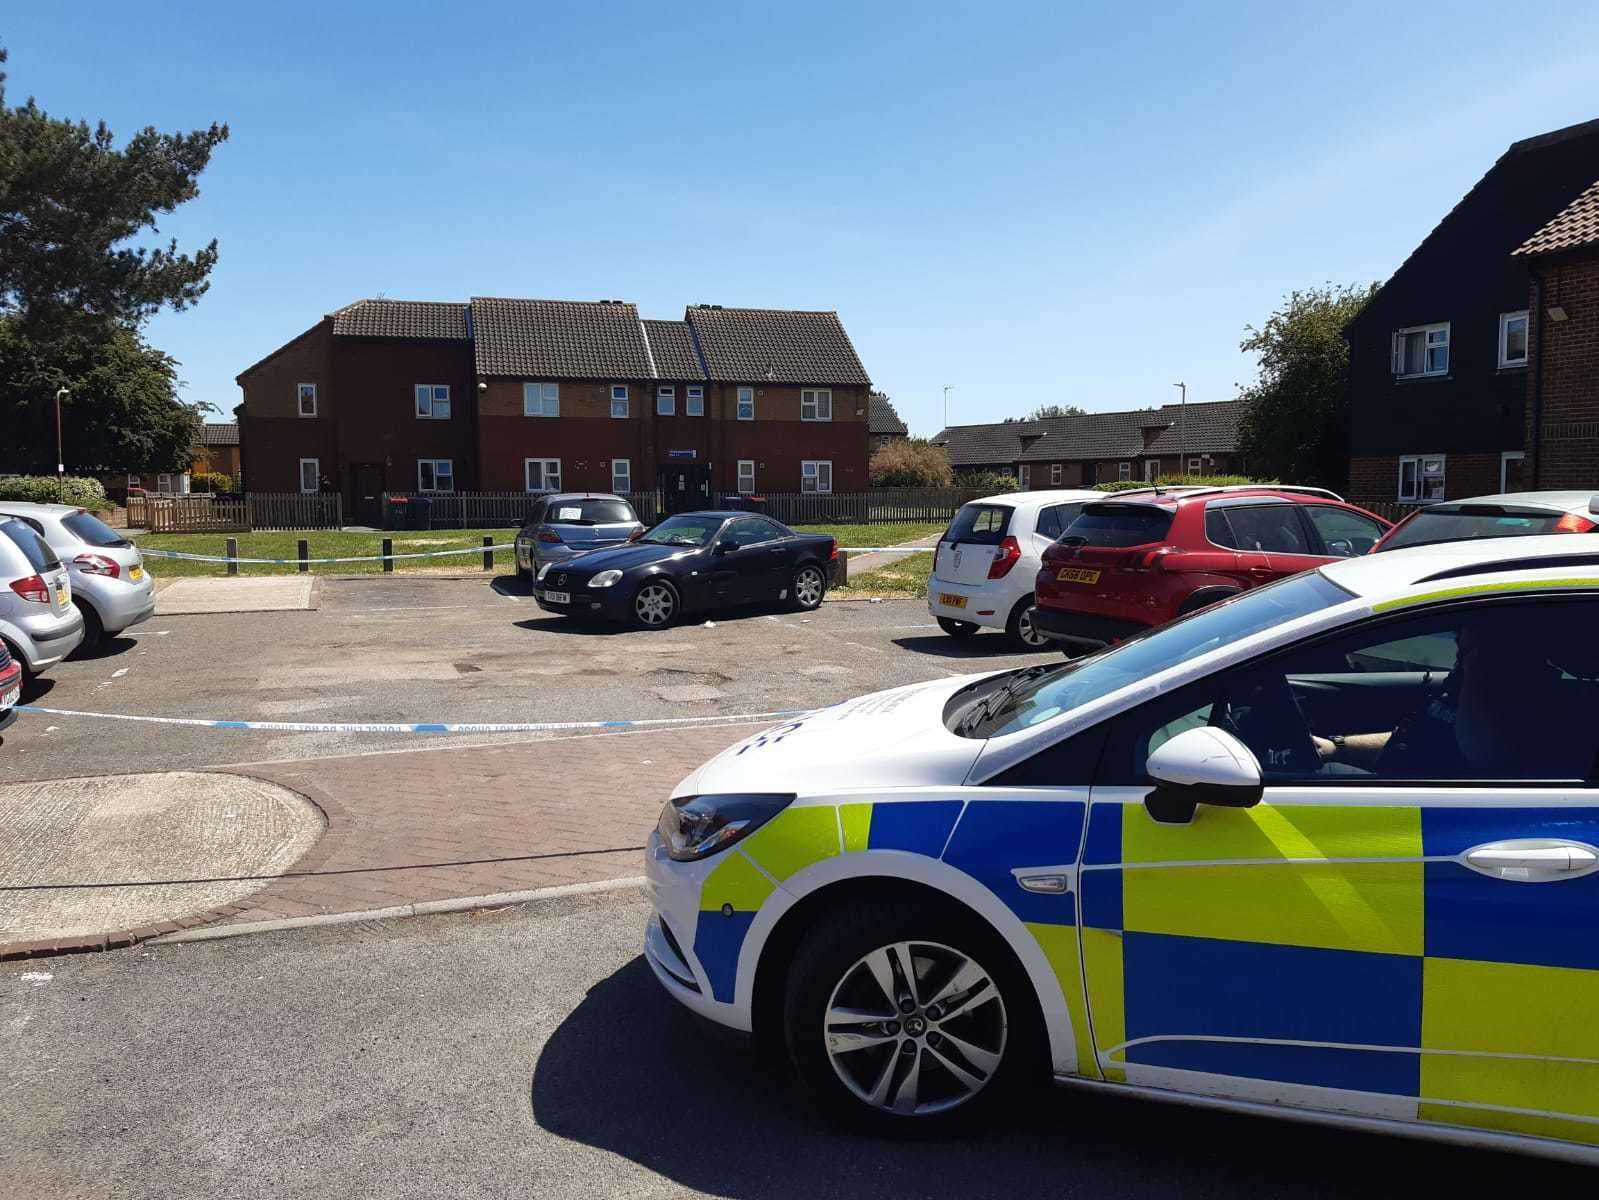 Police have taped off a car park in Collins Road, Herne Bay